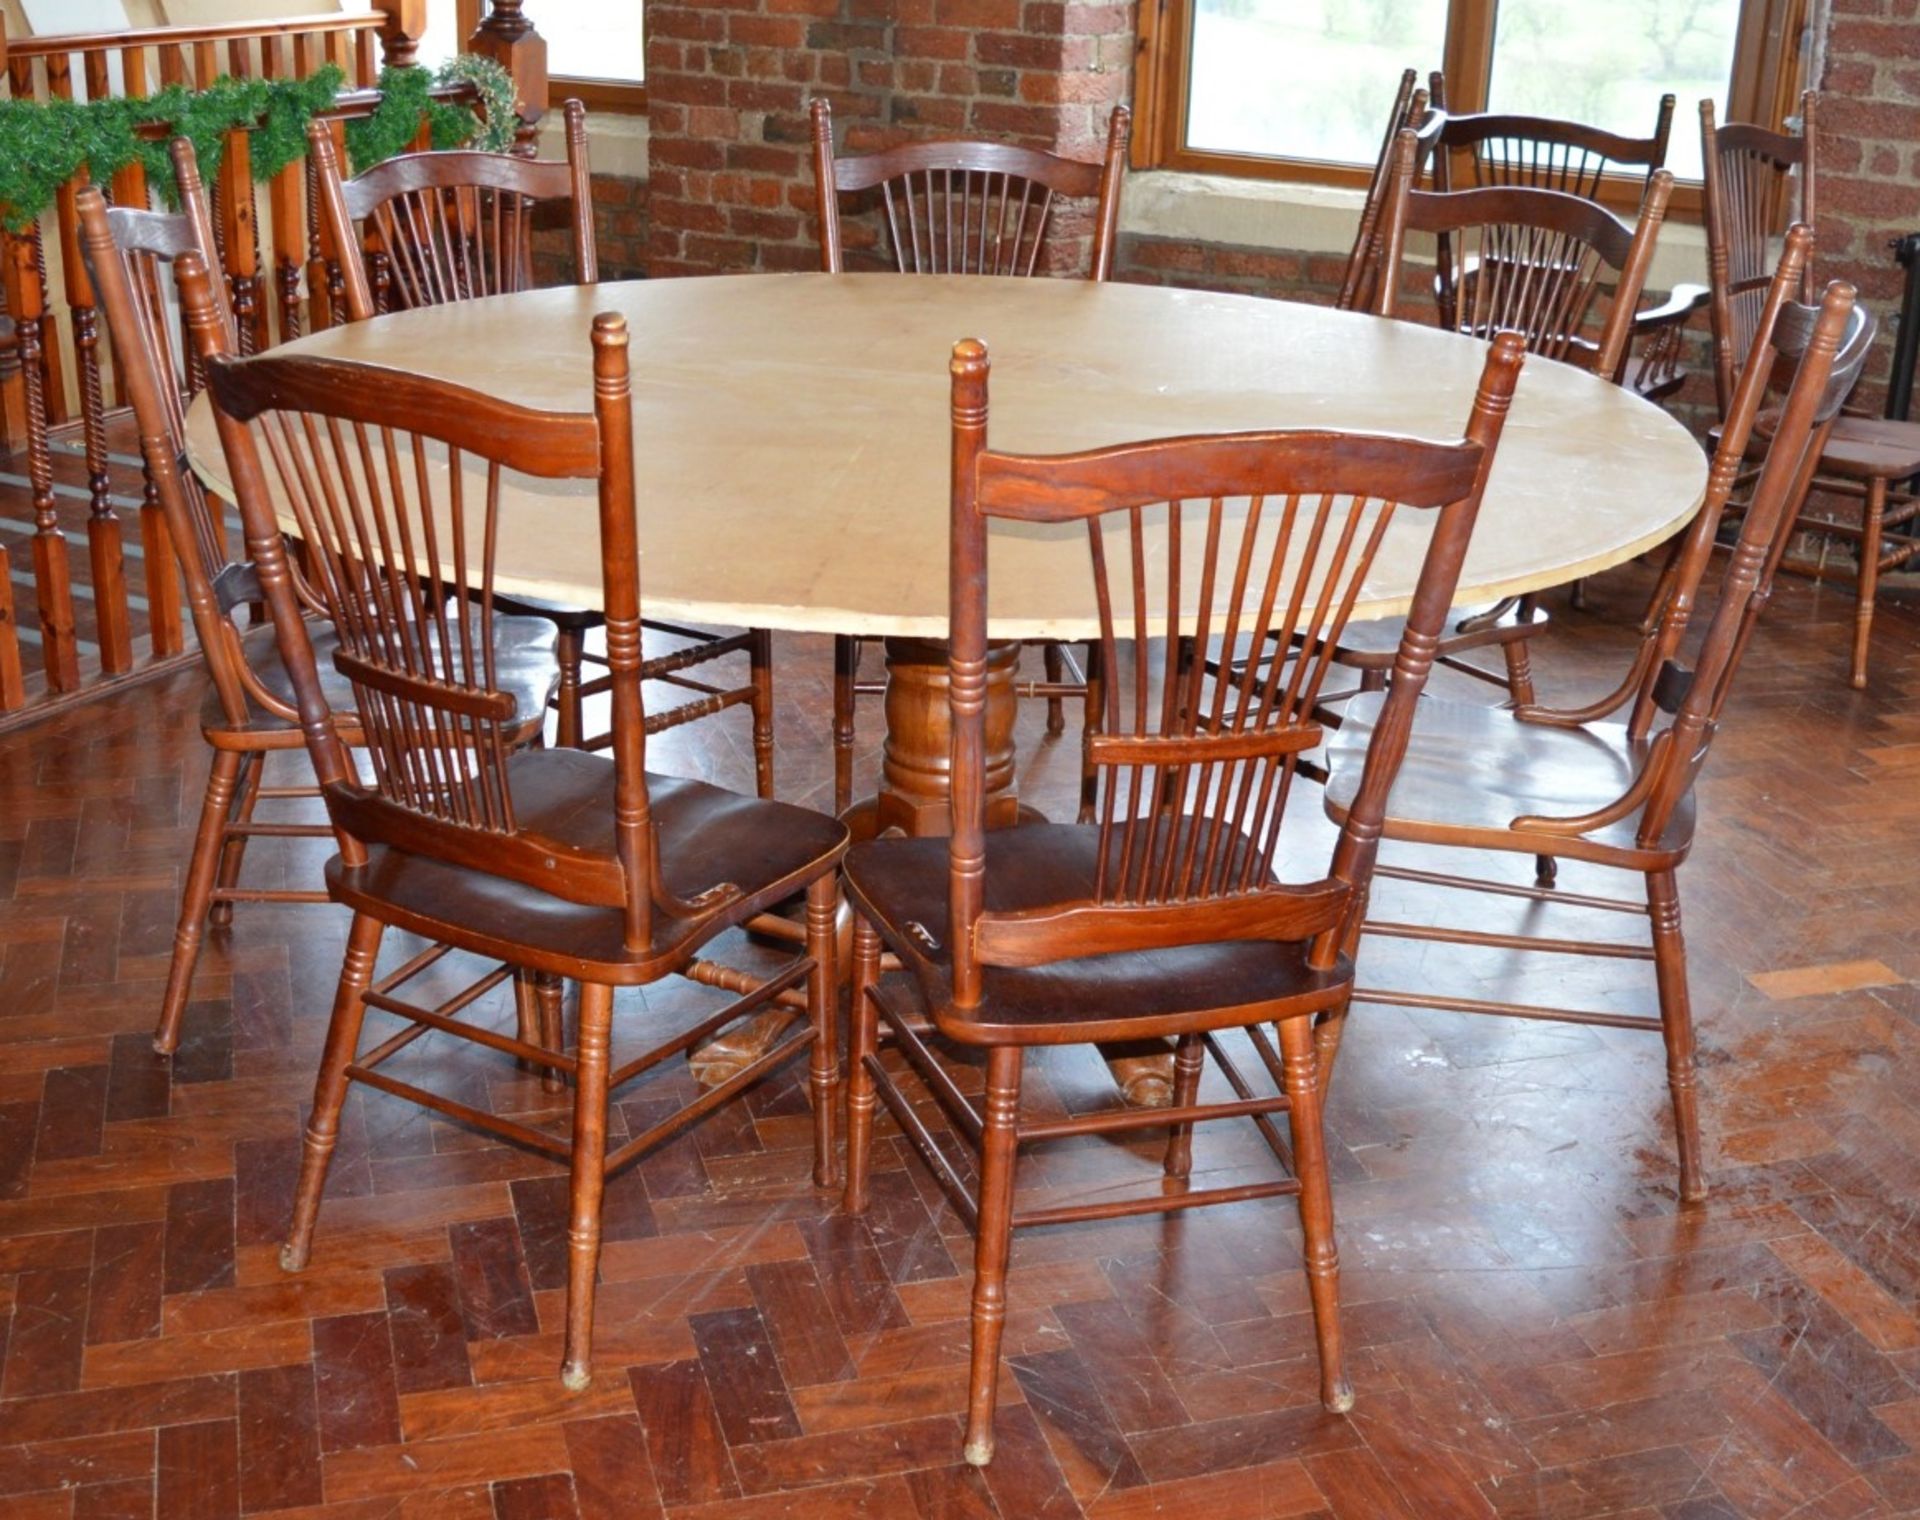 32 x Spindle Back Wooden Dining Chairs - H106 x W46 x D50 cms - Ref BB000 TF - CL351 - Location: - Image 6 of 7